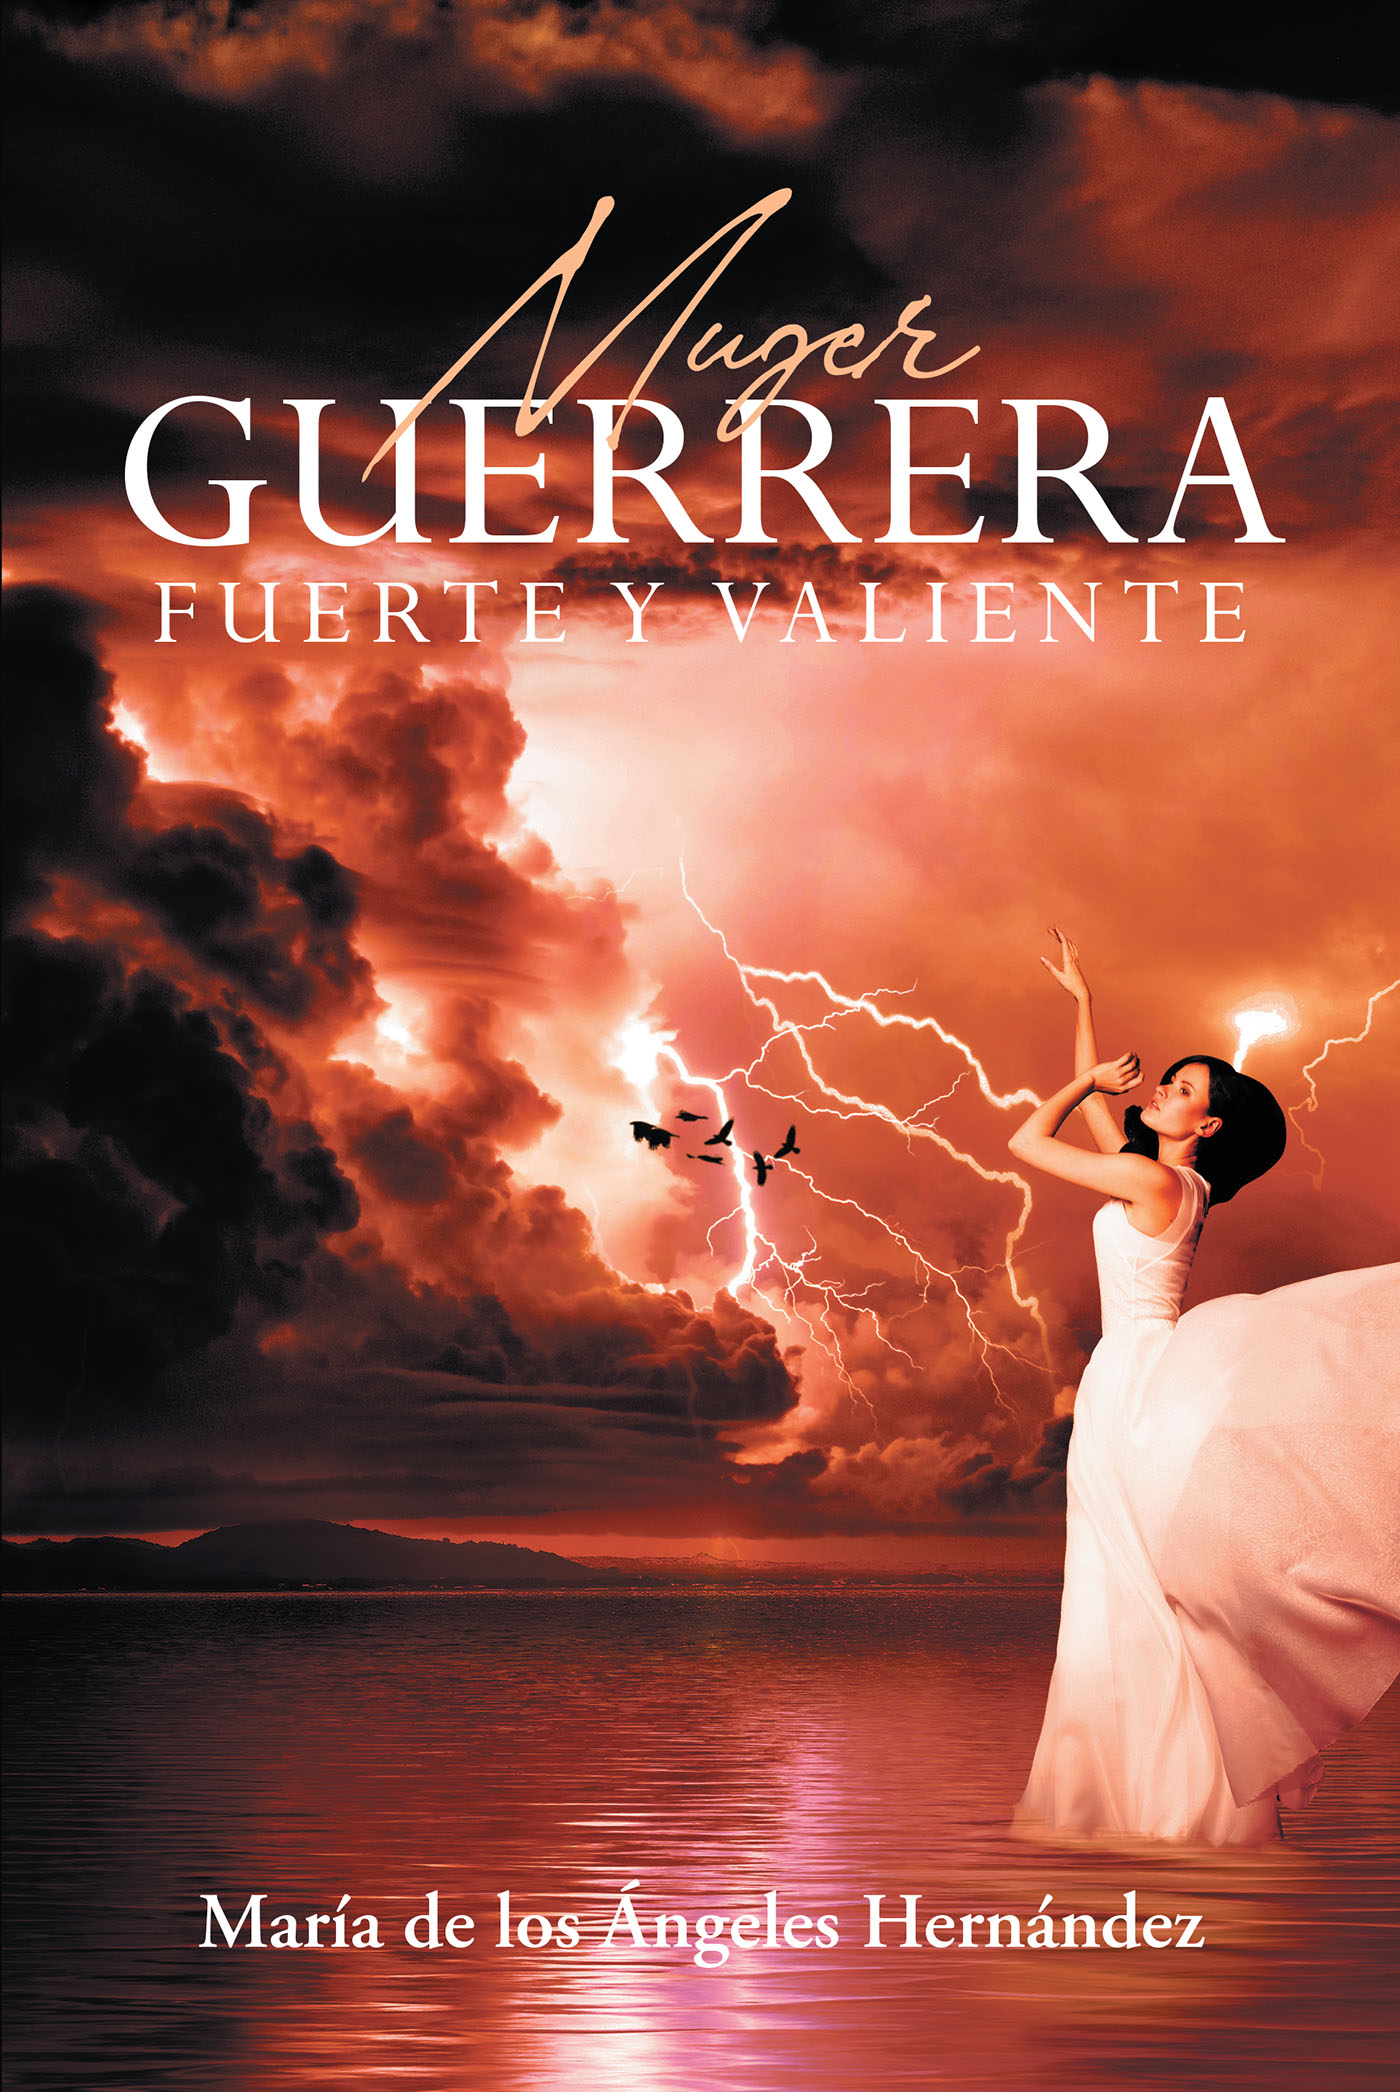 María de los Angeles Hernández’s New Book, “Mujer Guerrera Fuerte Y Valiente,” is an Empowering Read Created for Every Woman Out There